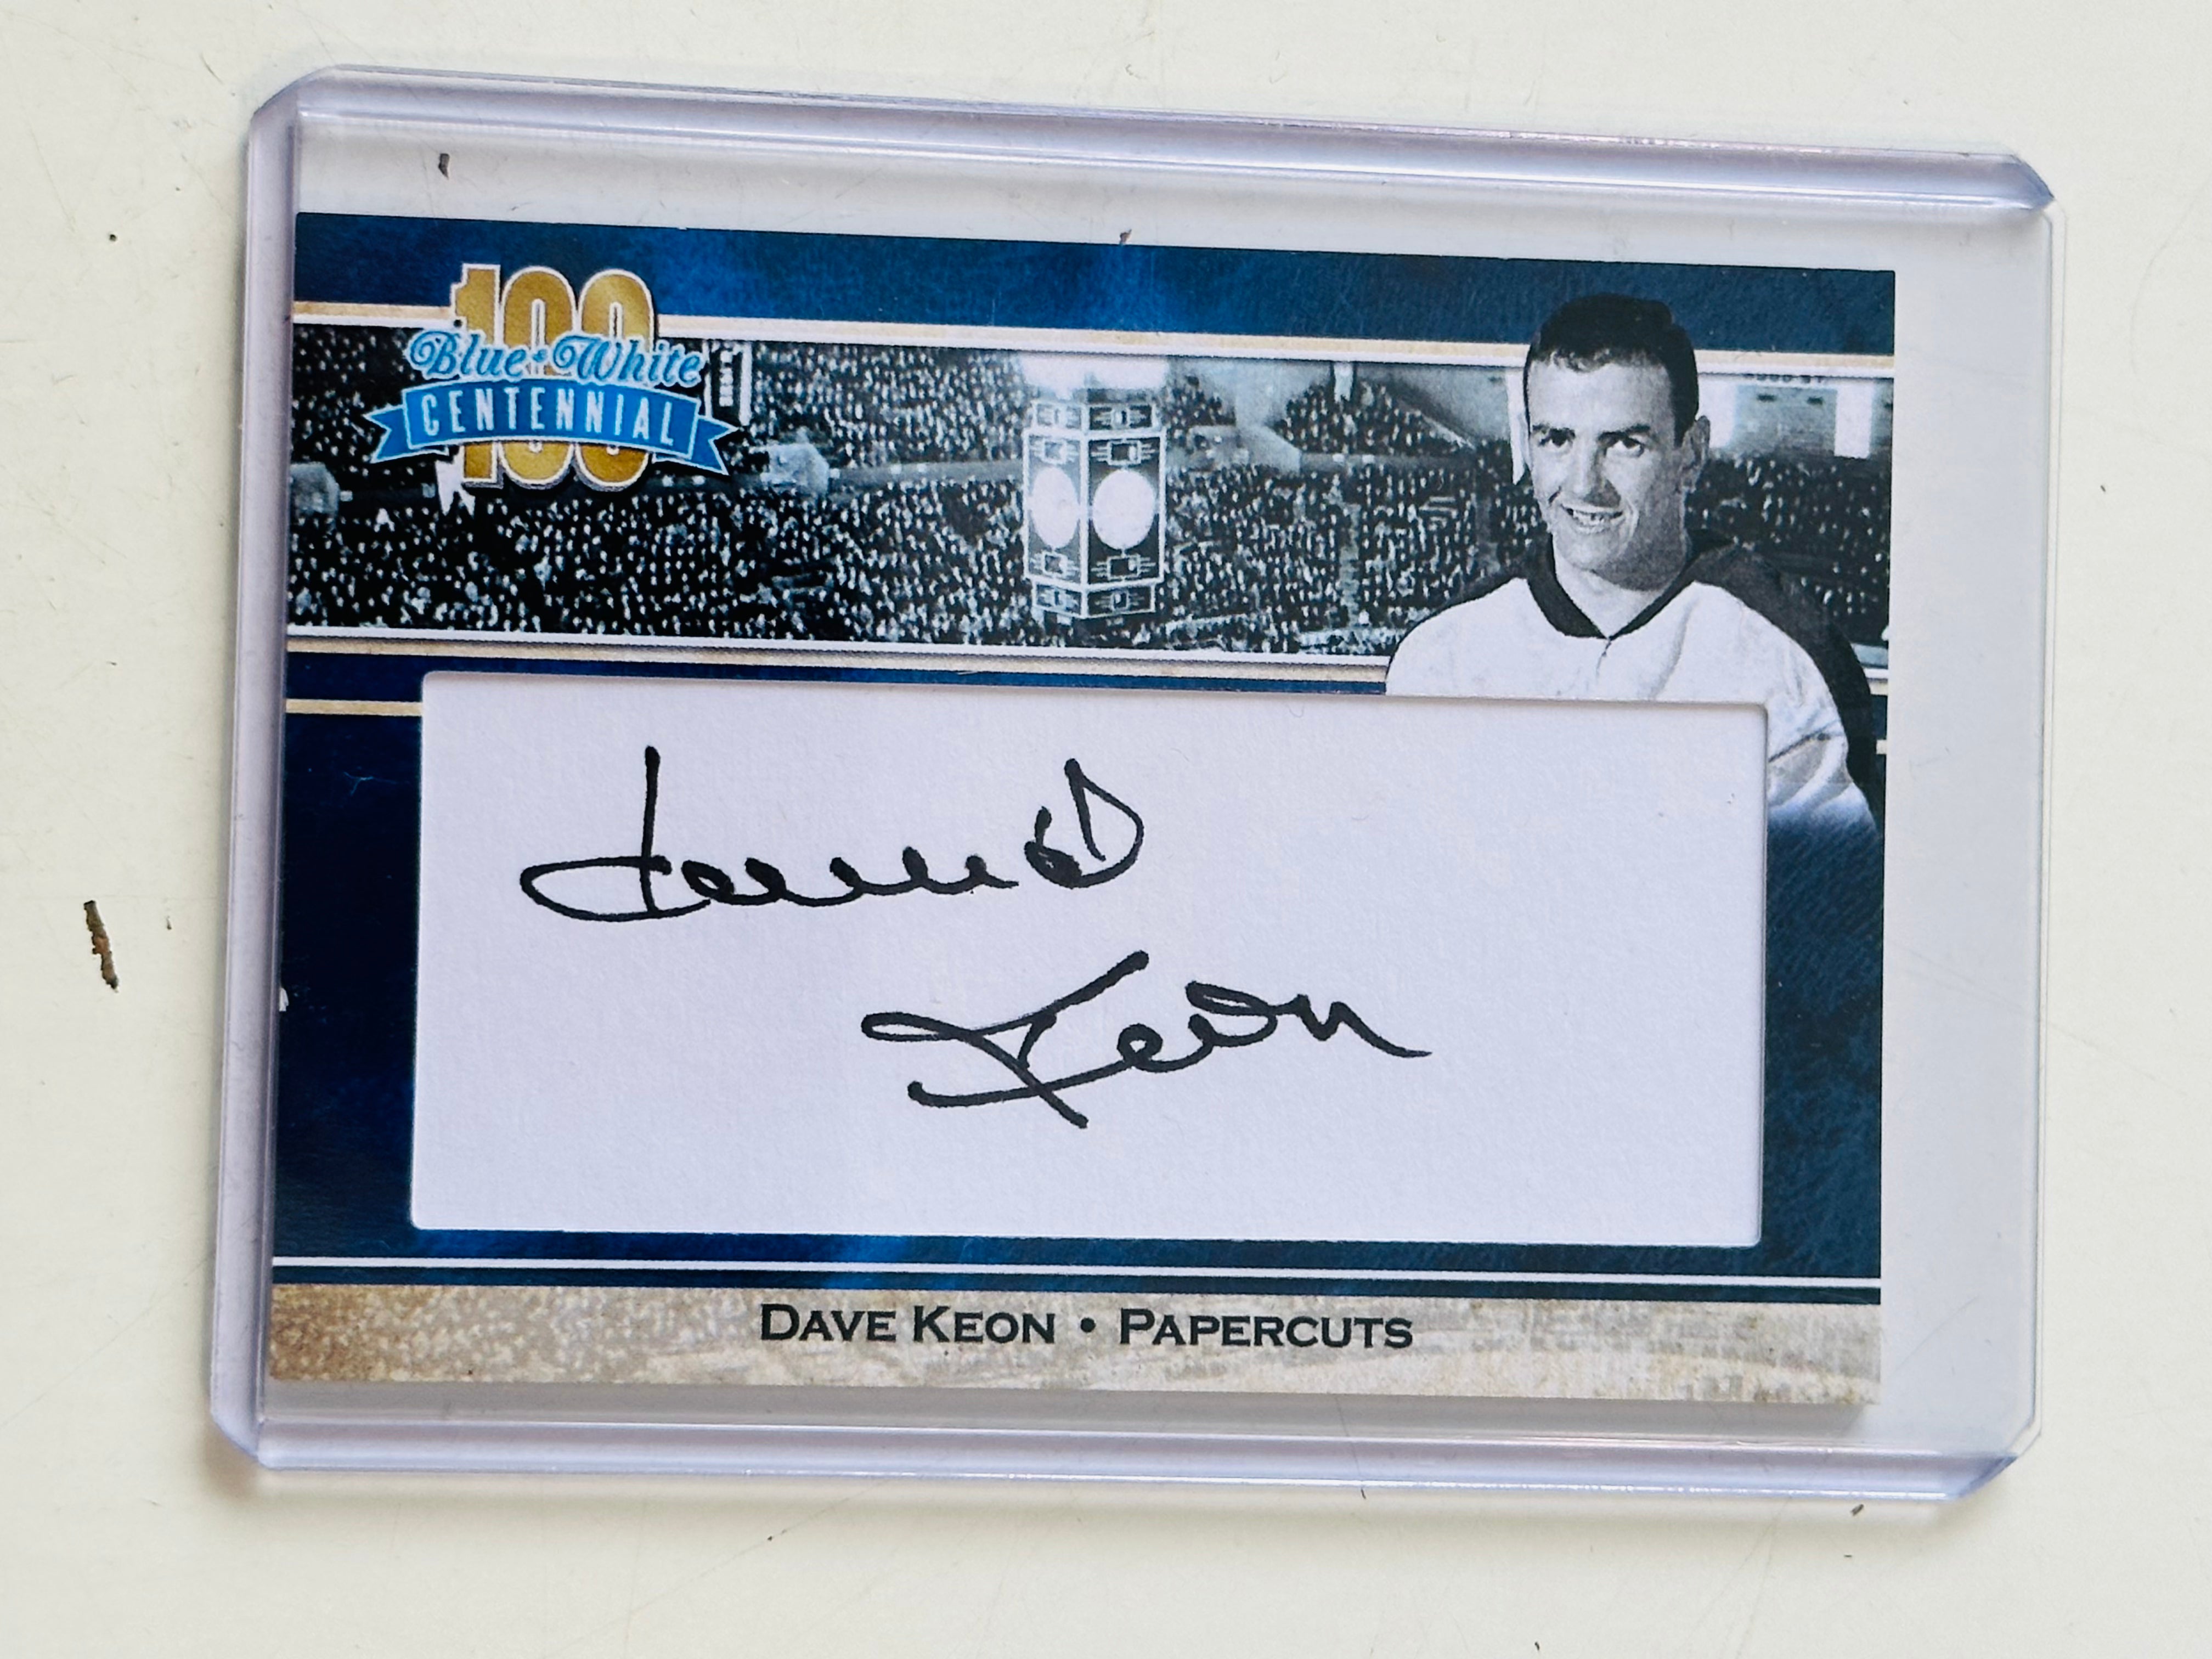 Dave Keon Leafs hockey legend autograph insert card certified on back.